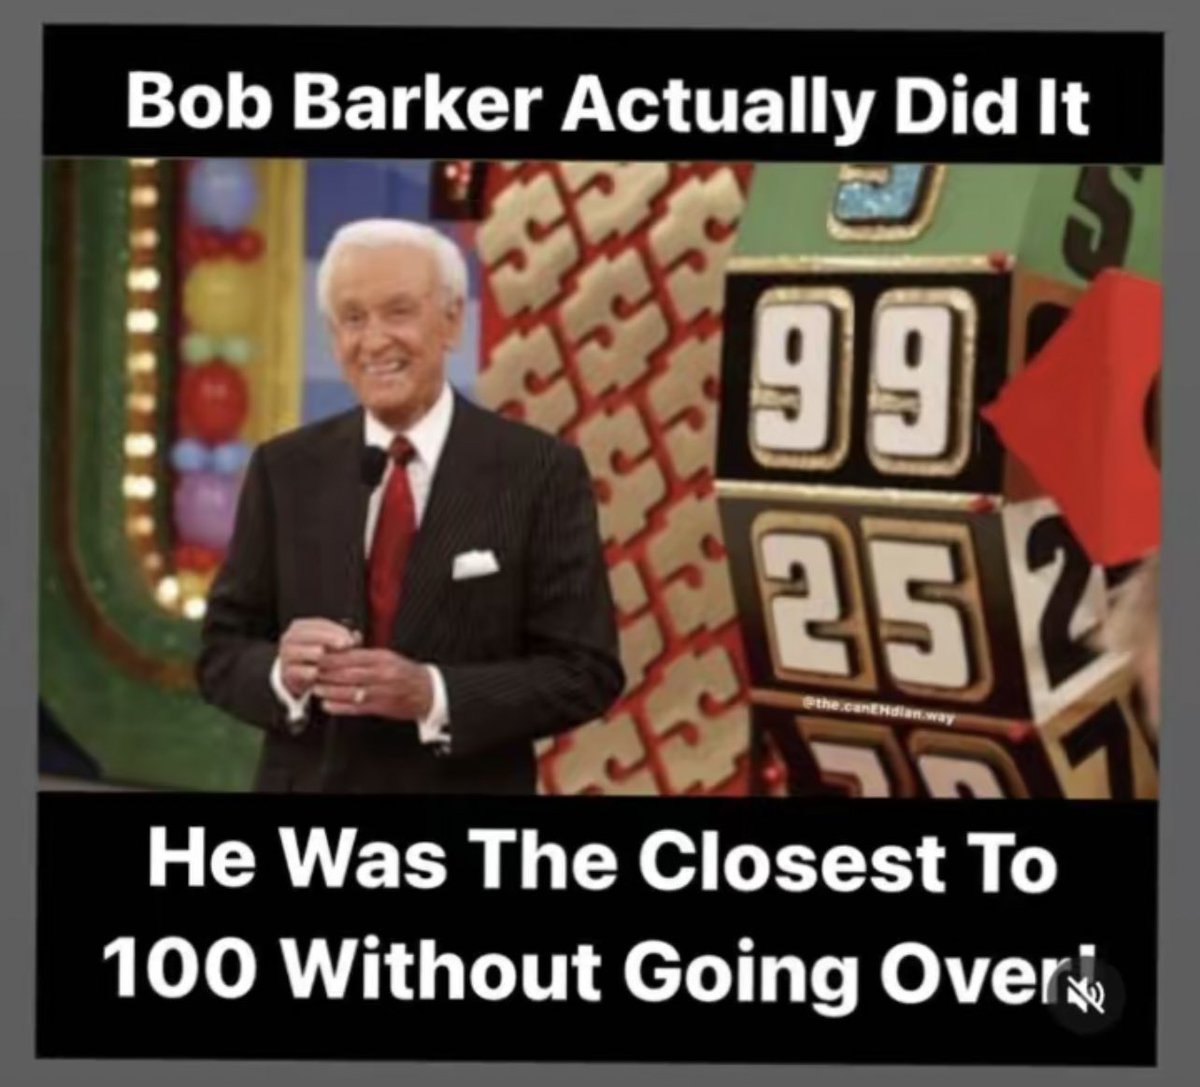 I feel like Bob would approve this.
#RIPBobBarker #ThePriceIsRight